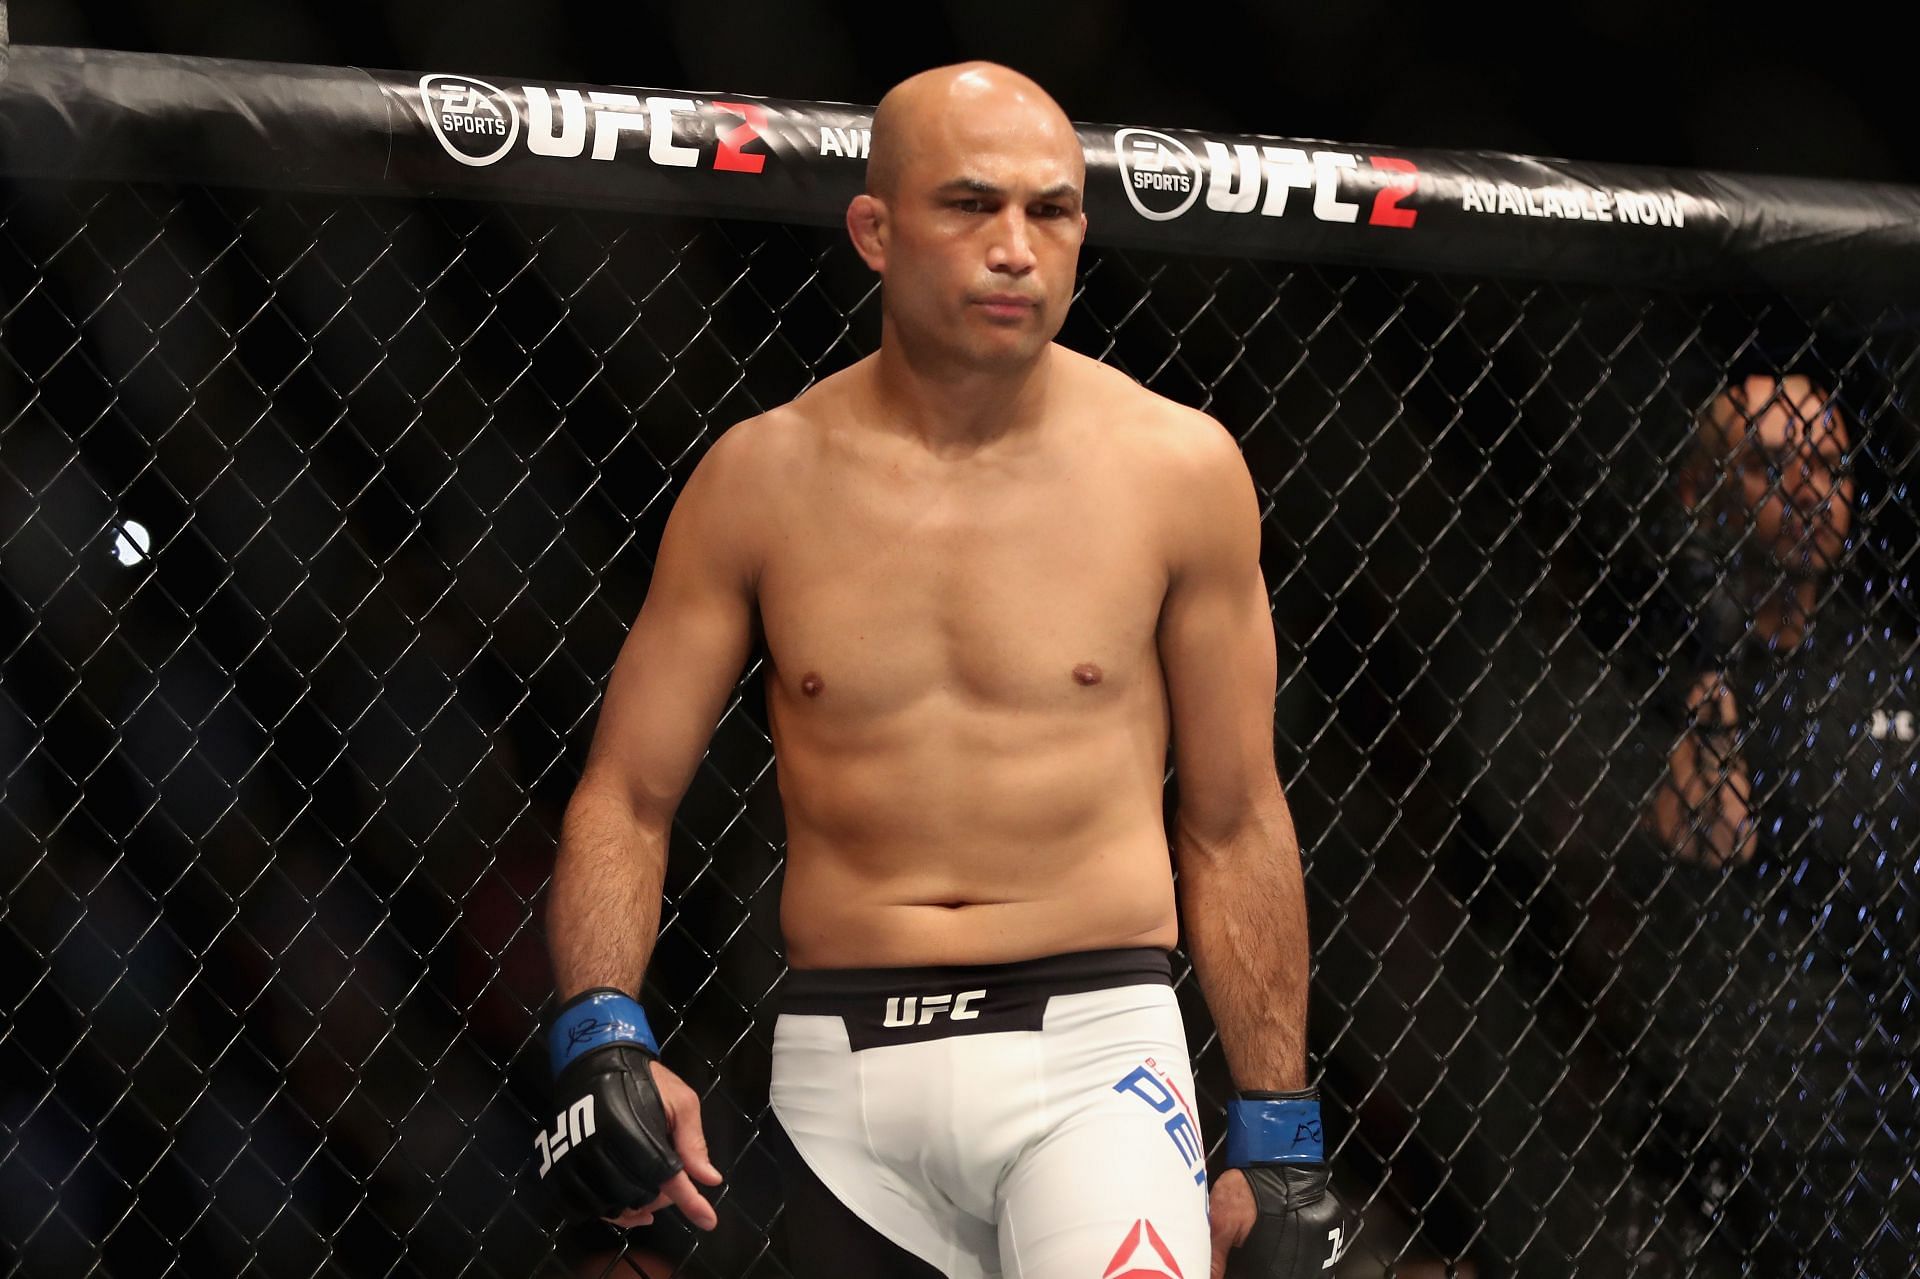 BJ Penn was the last UFC champion to depart the promotion while holding a title